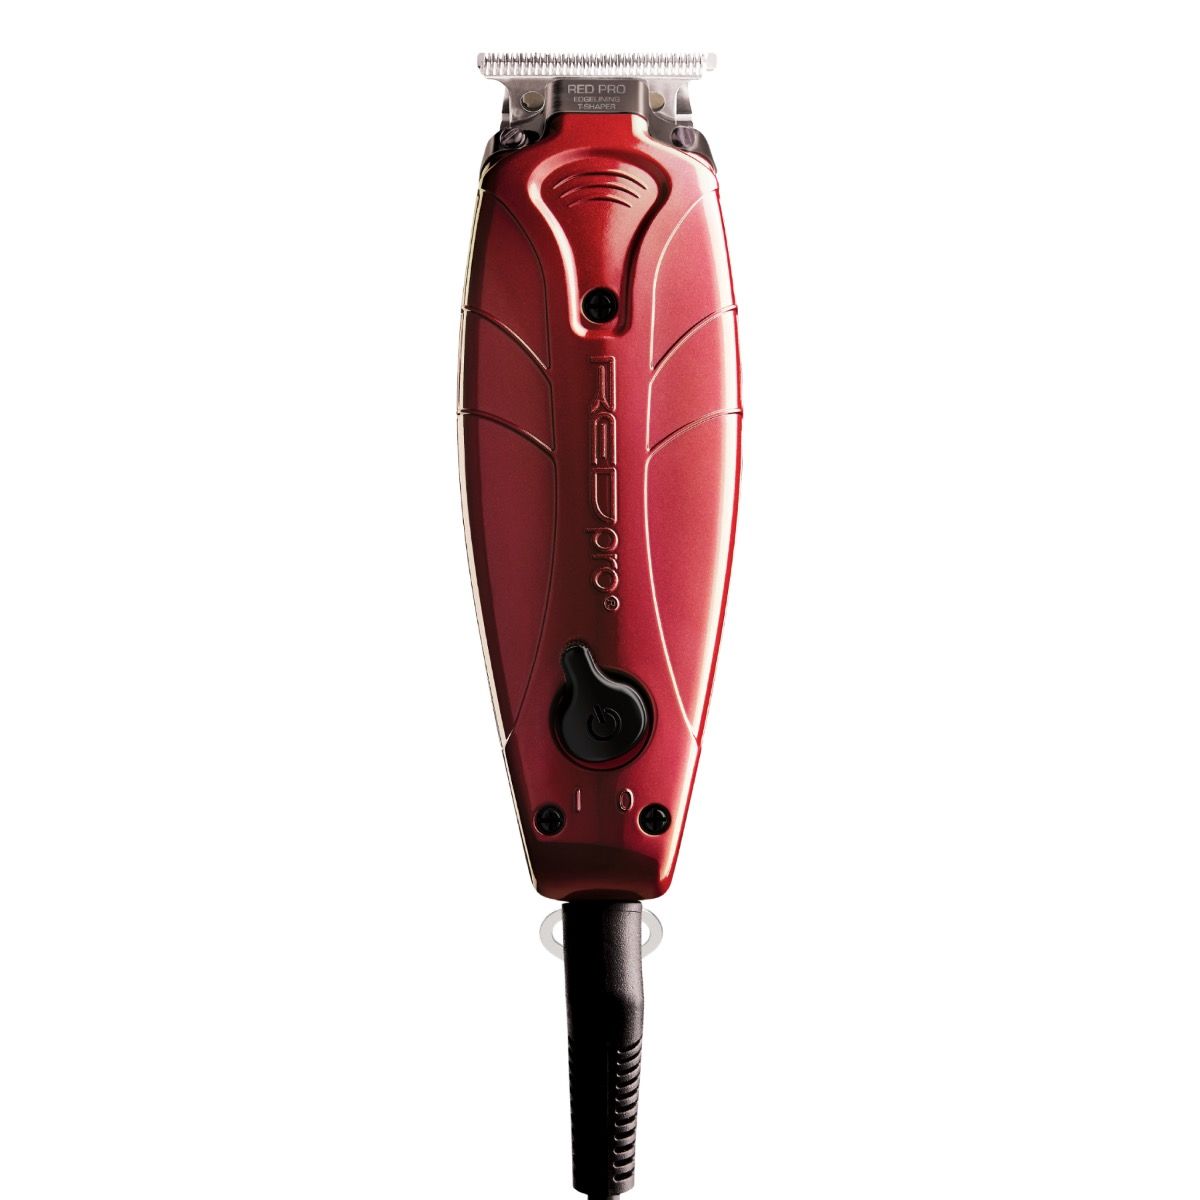 RED Edgelining T-Shaper Trimmer